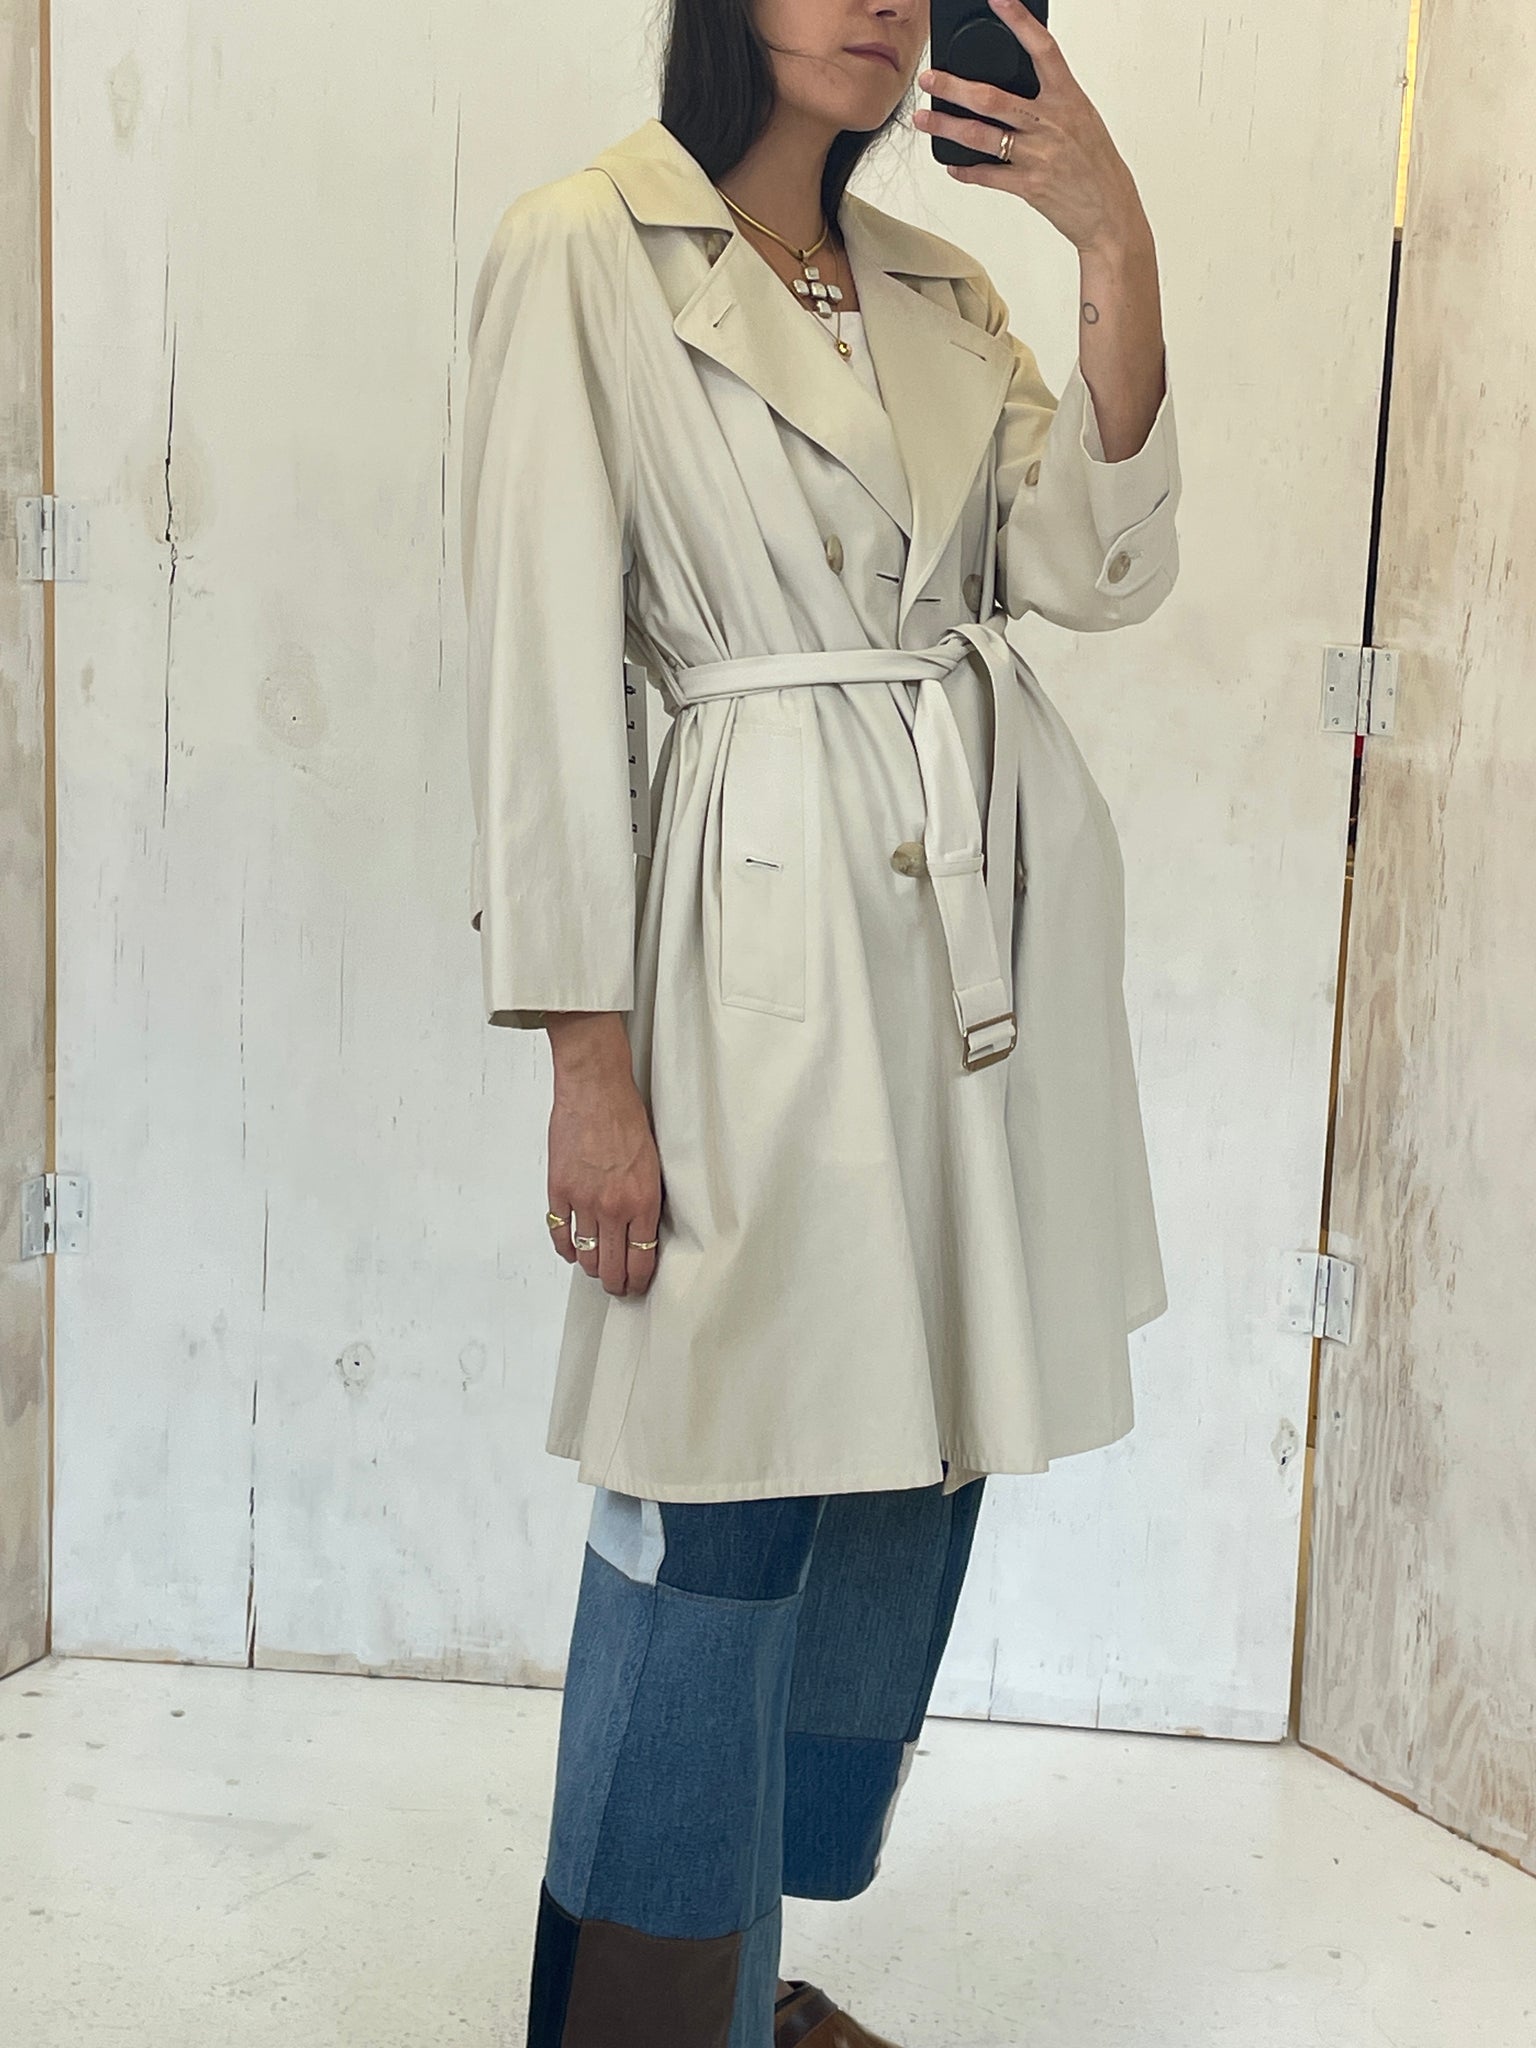 Burberry Spring Trench